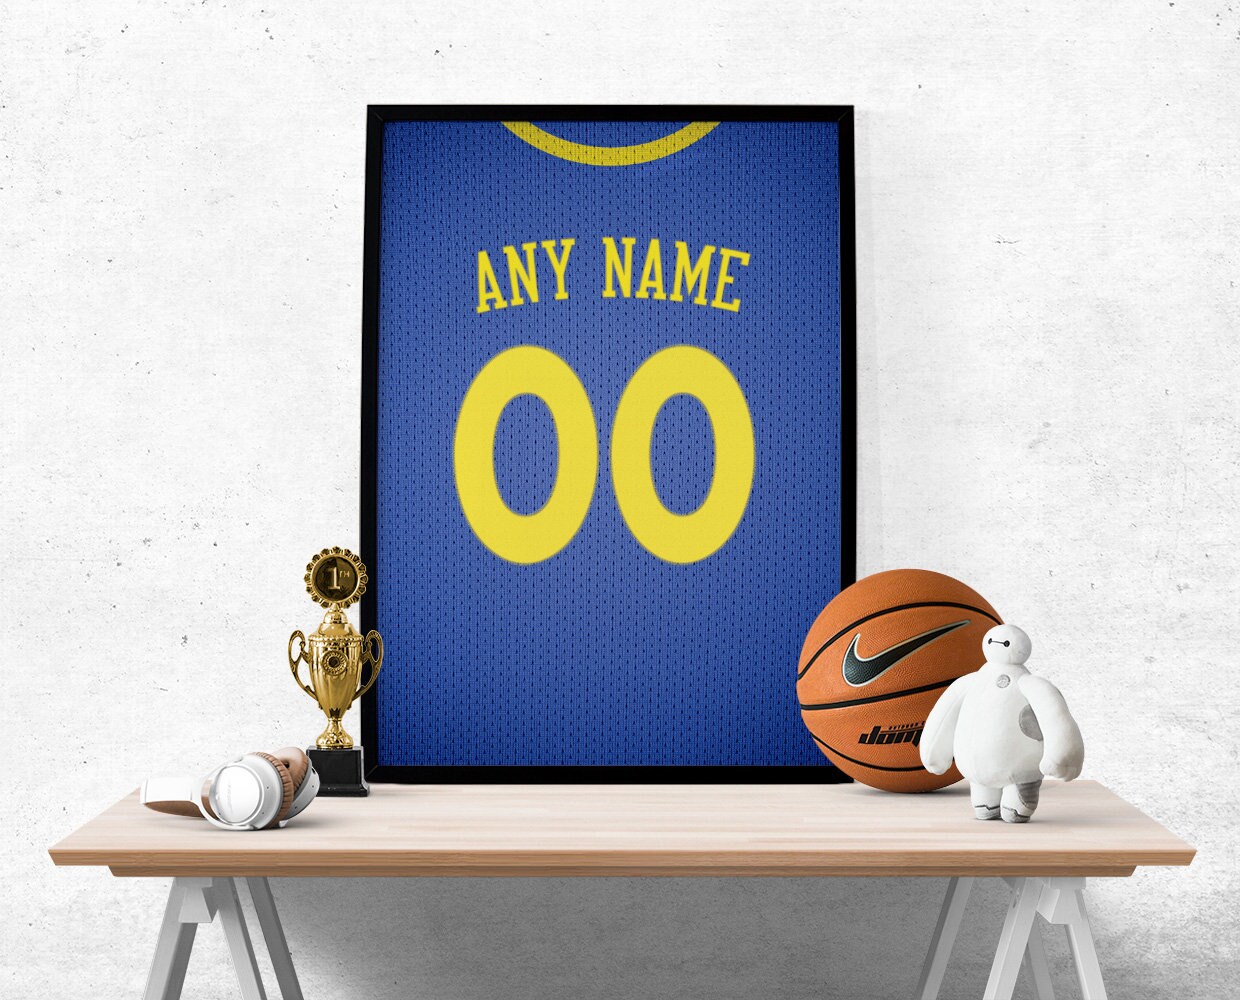 Golden State Warriors Jersey Poster Print - Personalized Any NAME and NUMBER, Basketball Poster, Man Cave, Sports Art Print, Wall Decor